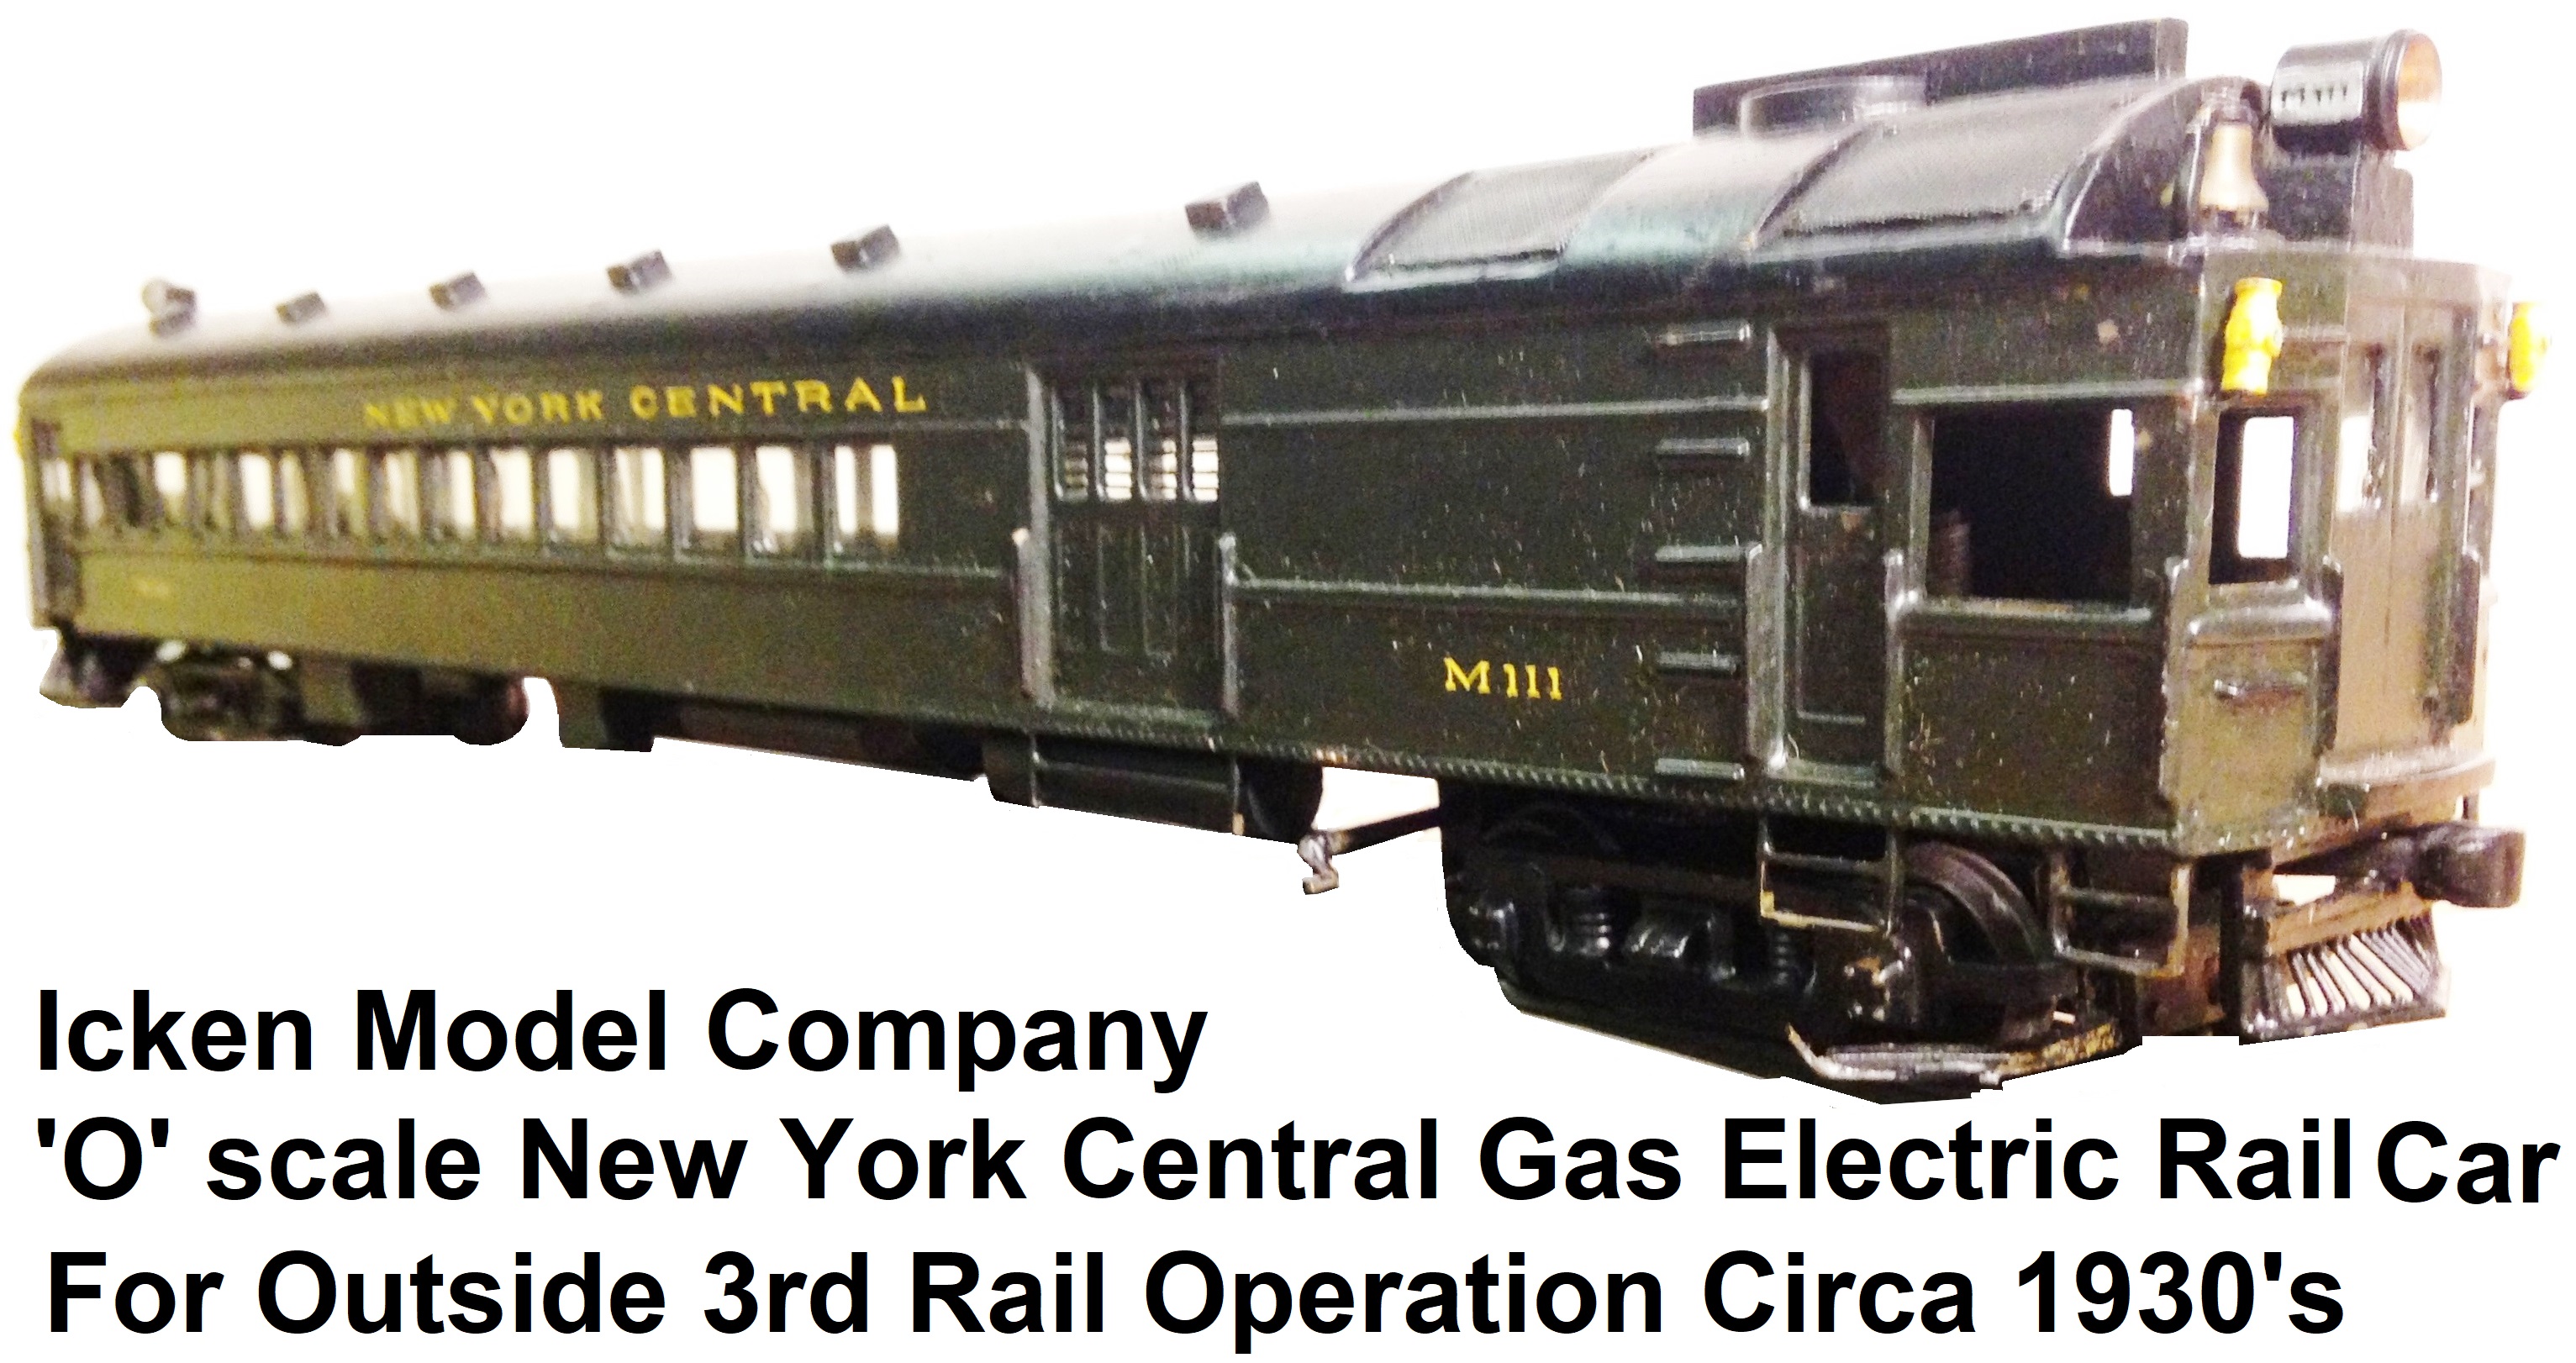 Icken Model Company 'O' scale 1930's Standard Gas Electric Car in New York Central livery for outside 3rd rail